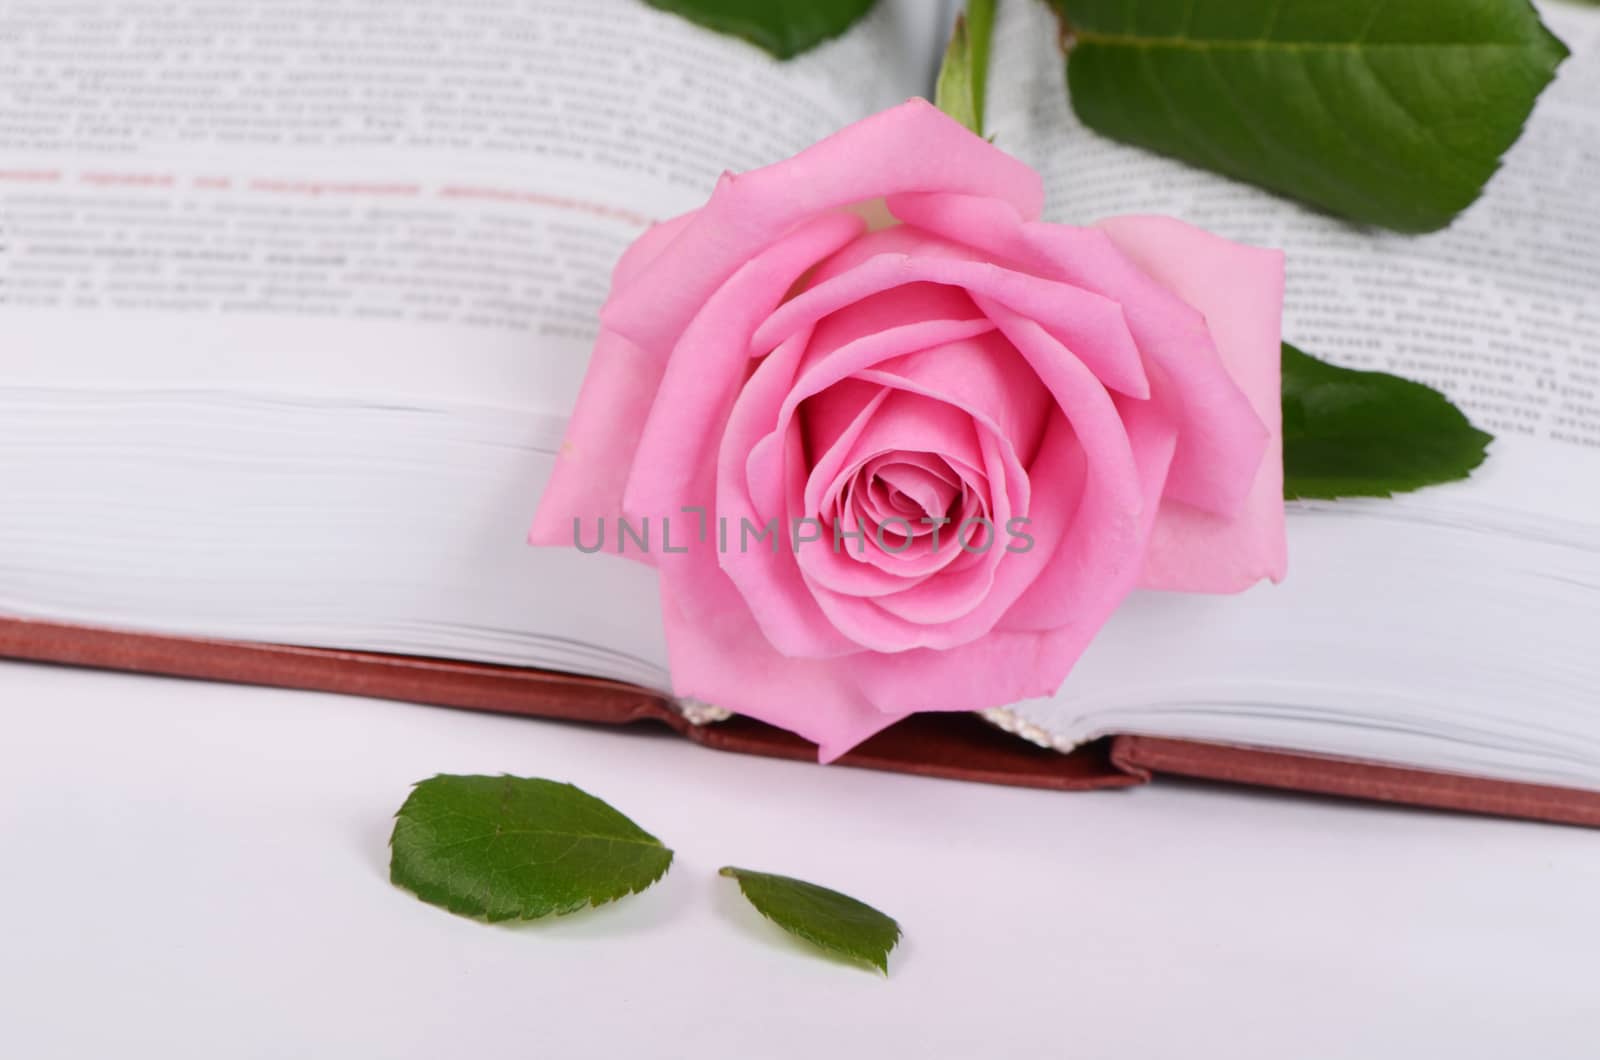 The rose on the book close up by SvetaVo